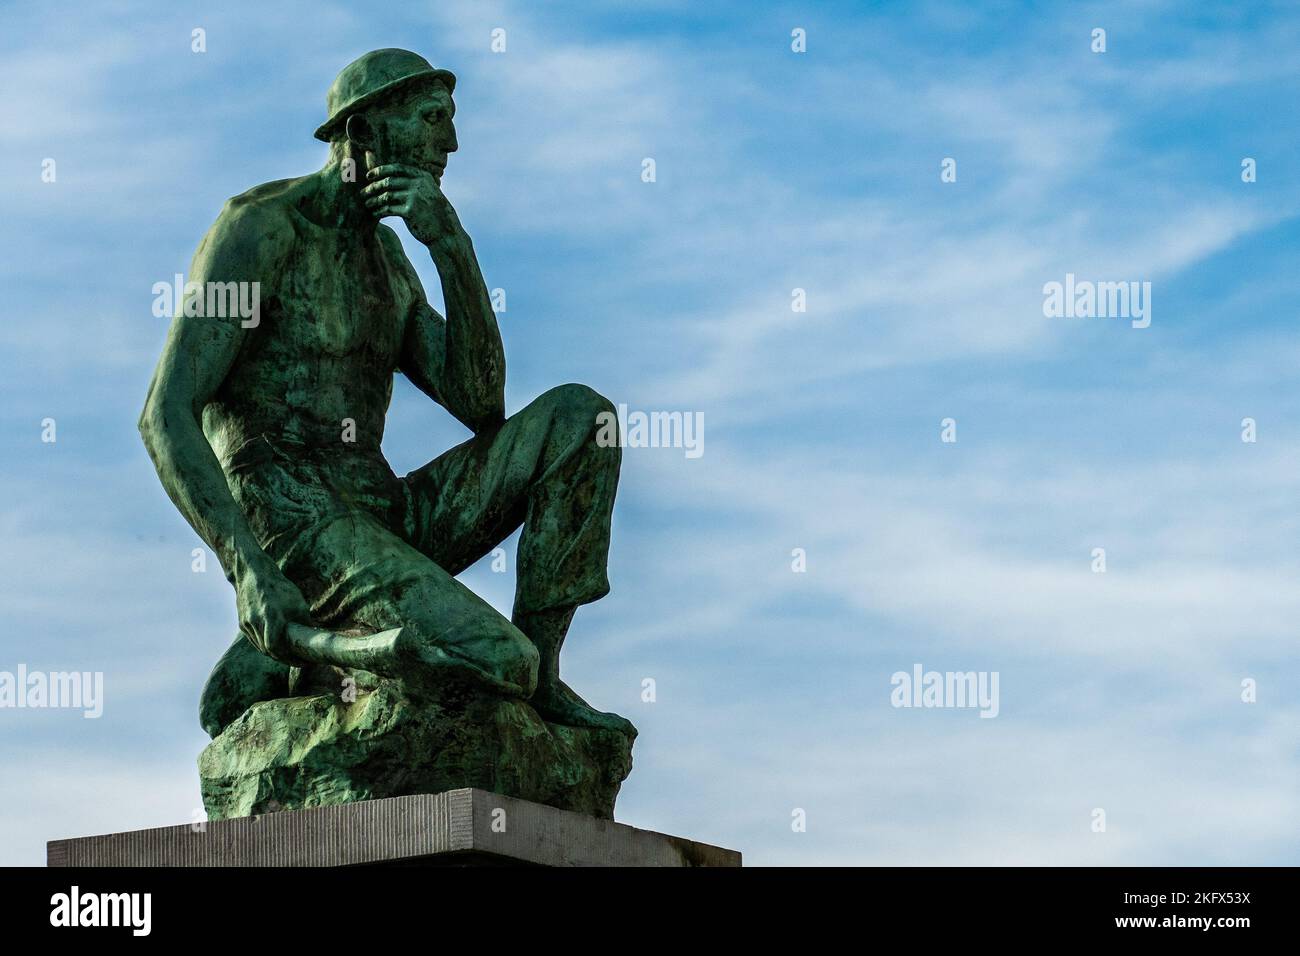 Charleroi, Belgium, November 11, 2022. The Crouching Miner located is a monument dedicated to Labor, designed by Constantin Meunier. Stock Photo